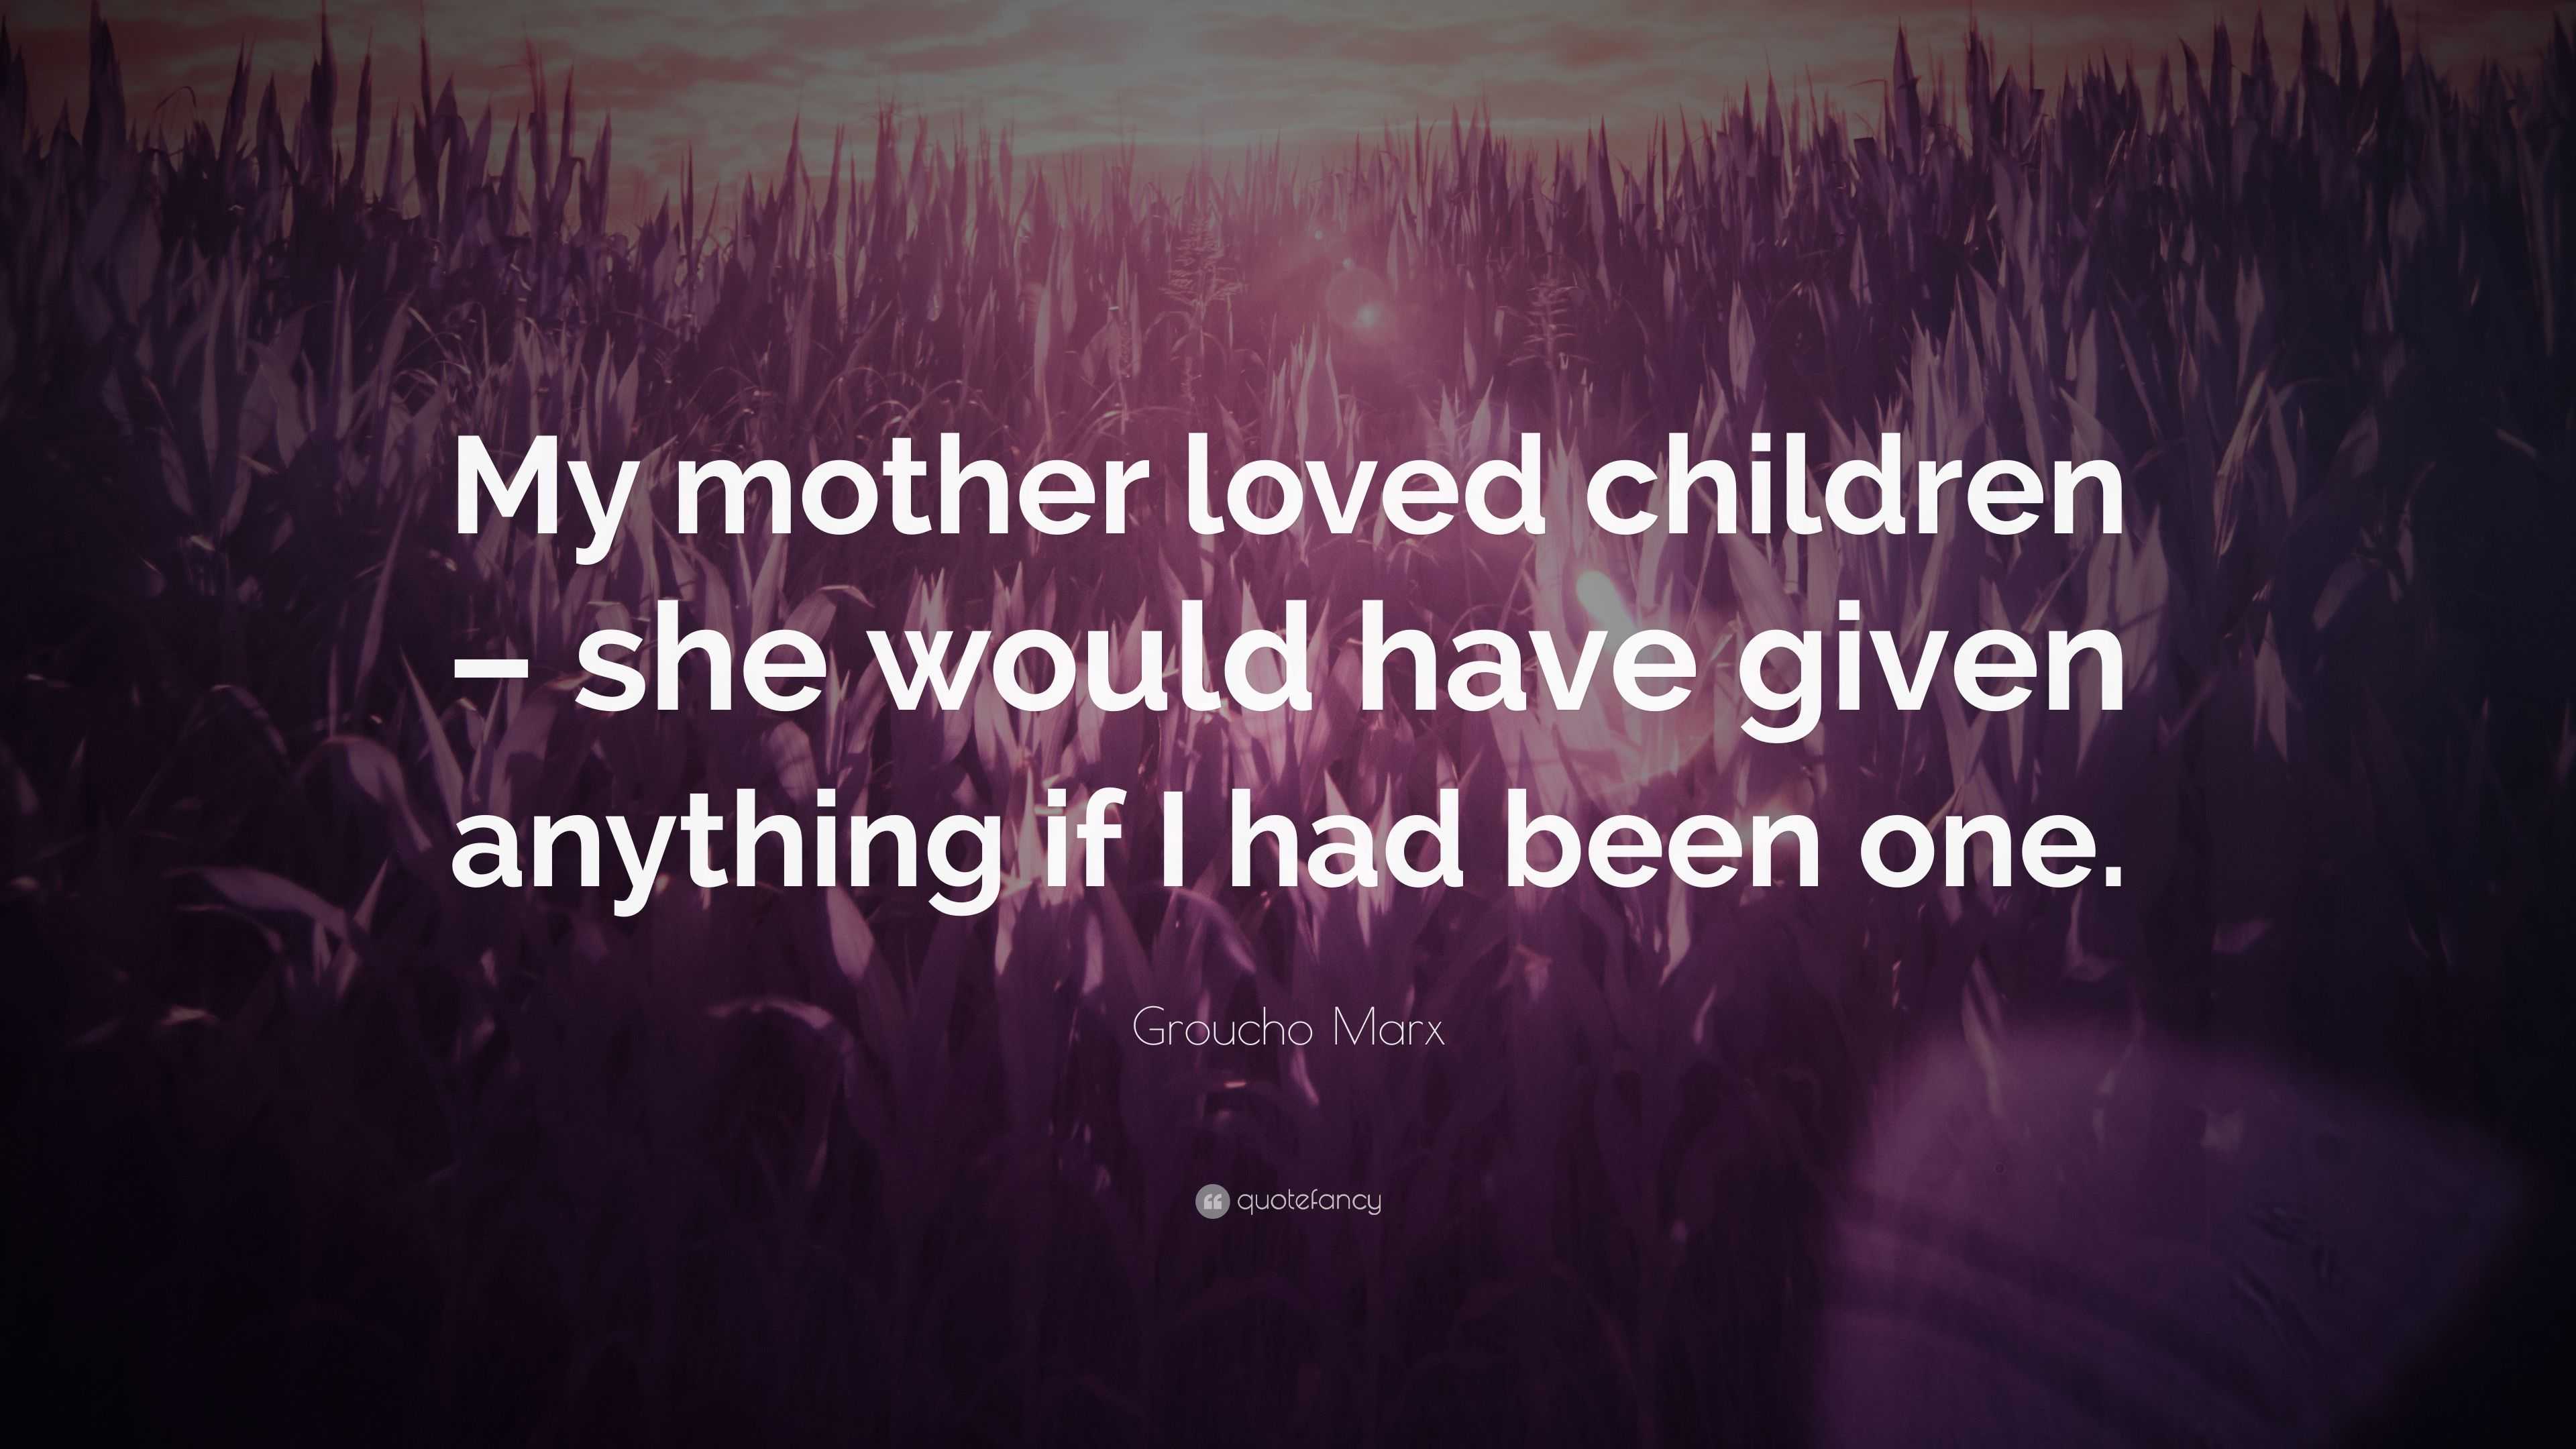 Groucho Marx Quote: “My mother loved children – she would have given ...